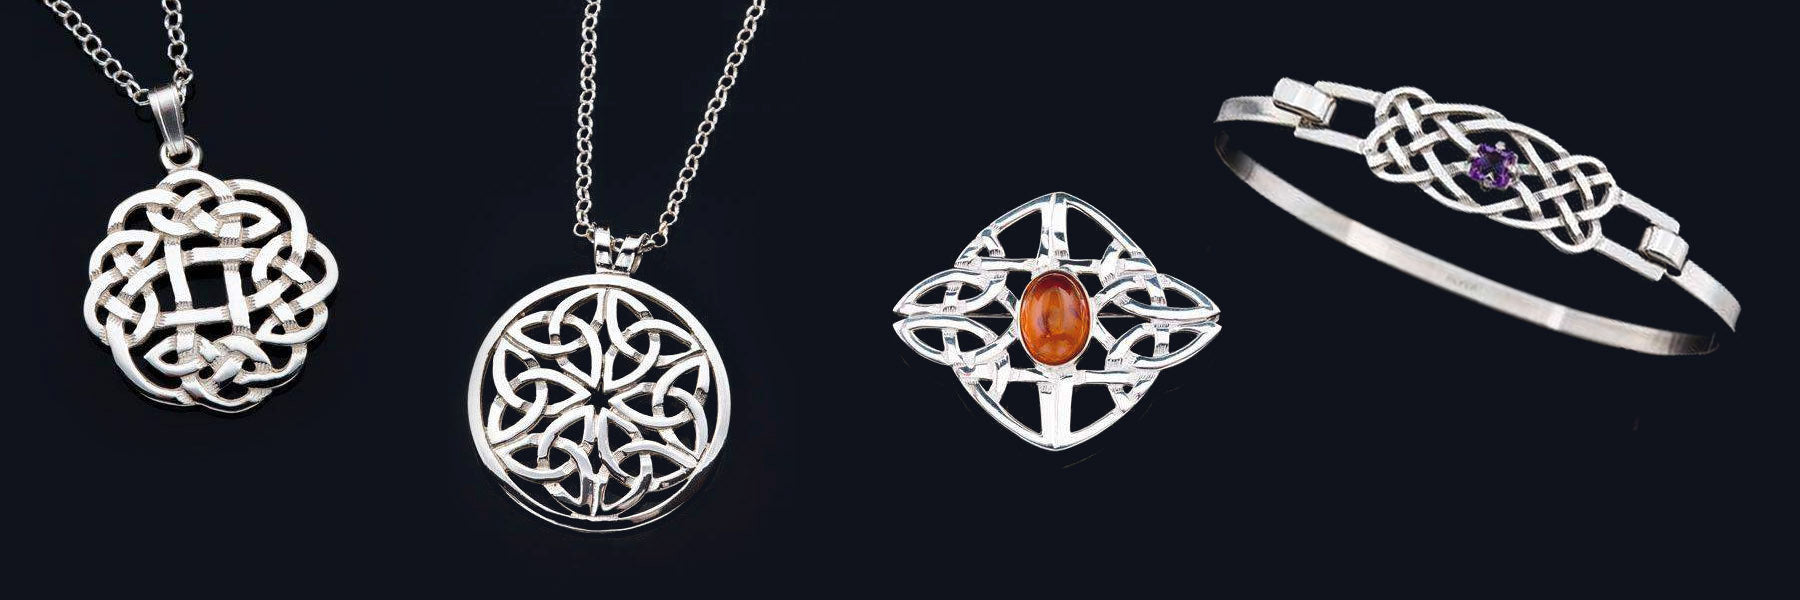 19 Things You Need to Know About Celtic Jewellery